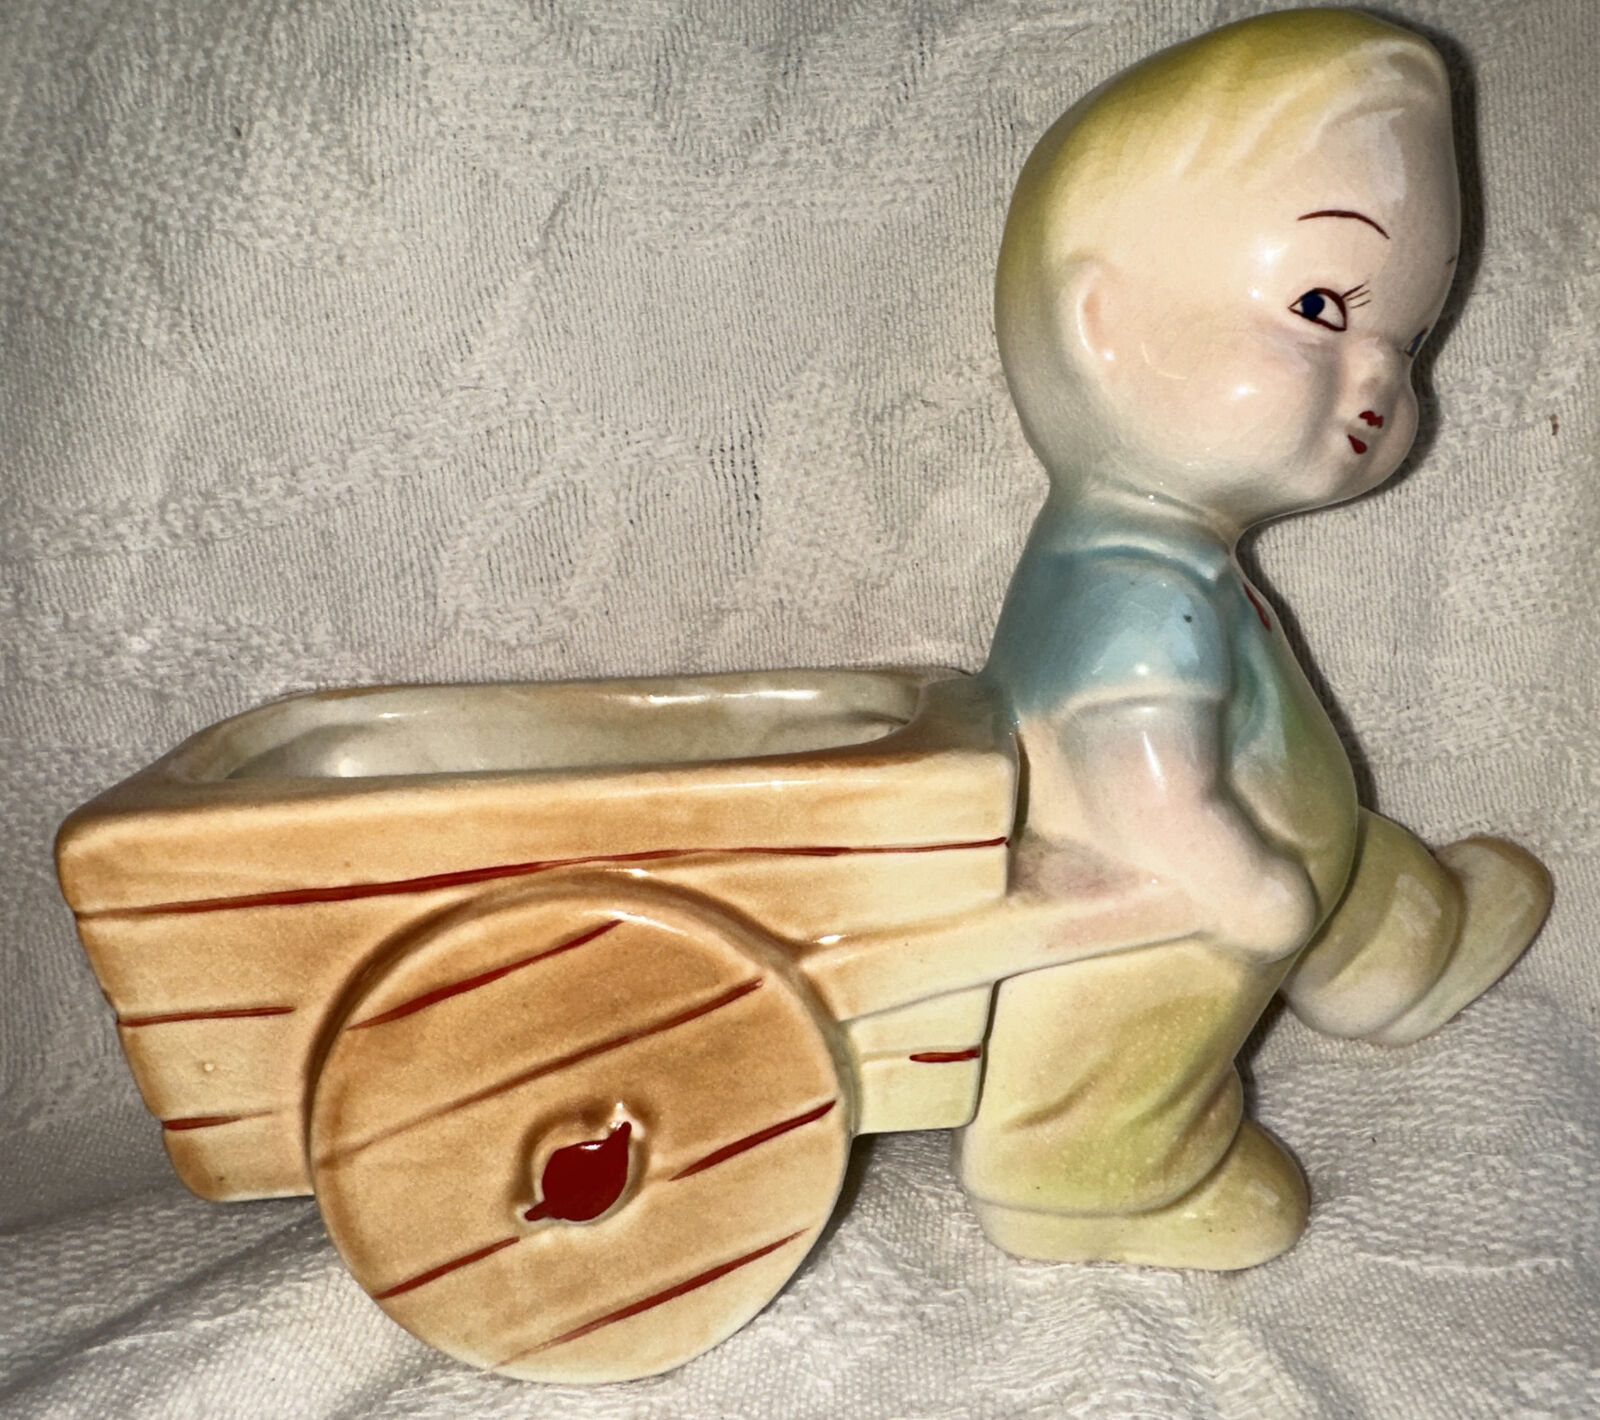 Shawnee Planter Vintage Blond Boy in overalls pulling a cart